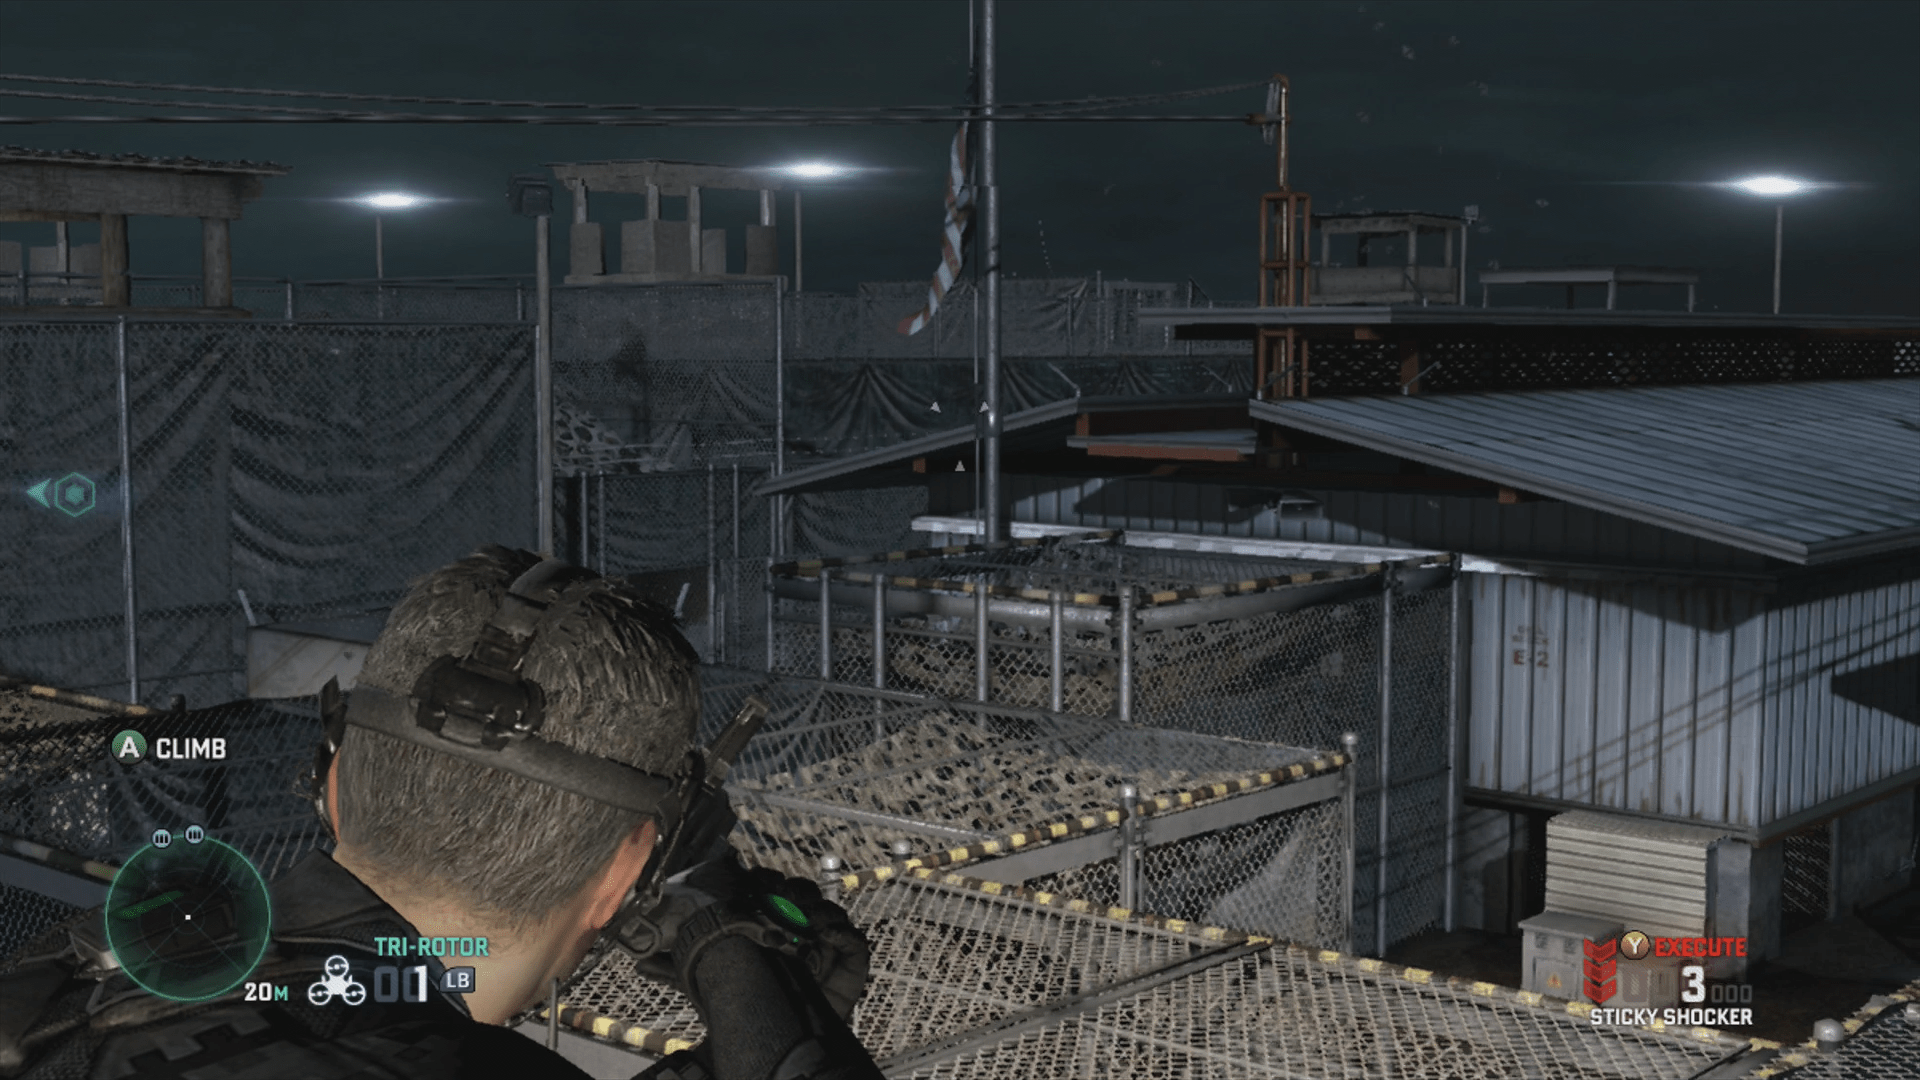 Splinter Cell  And One Of The Most Notorious Places In The World